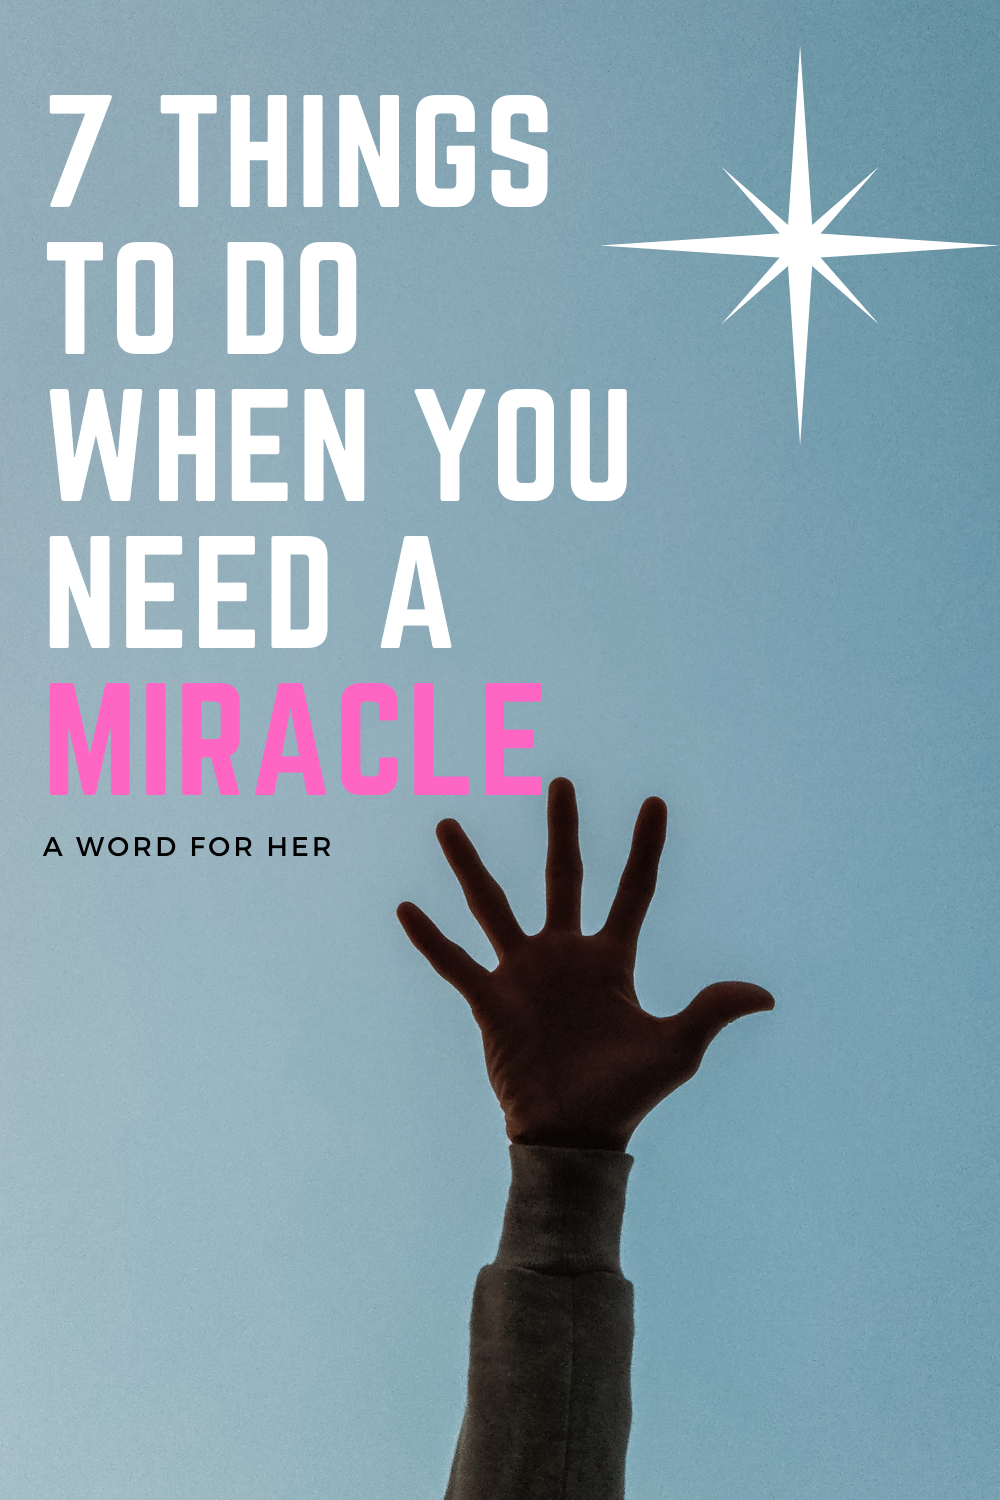 7 things to do when you need a miracle , Steps to follow to receive miracles , encouraging words for anyone that needs a miracle , divine intervention of God , supernatural acts of God 